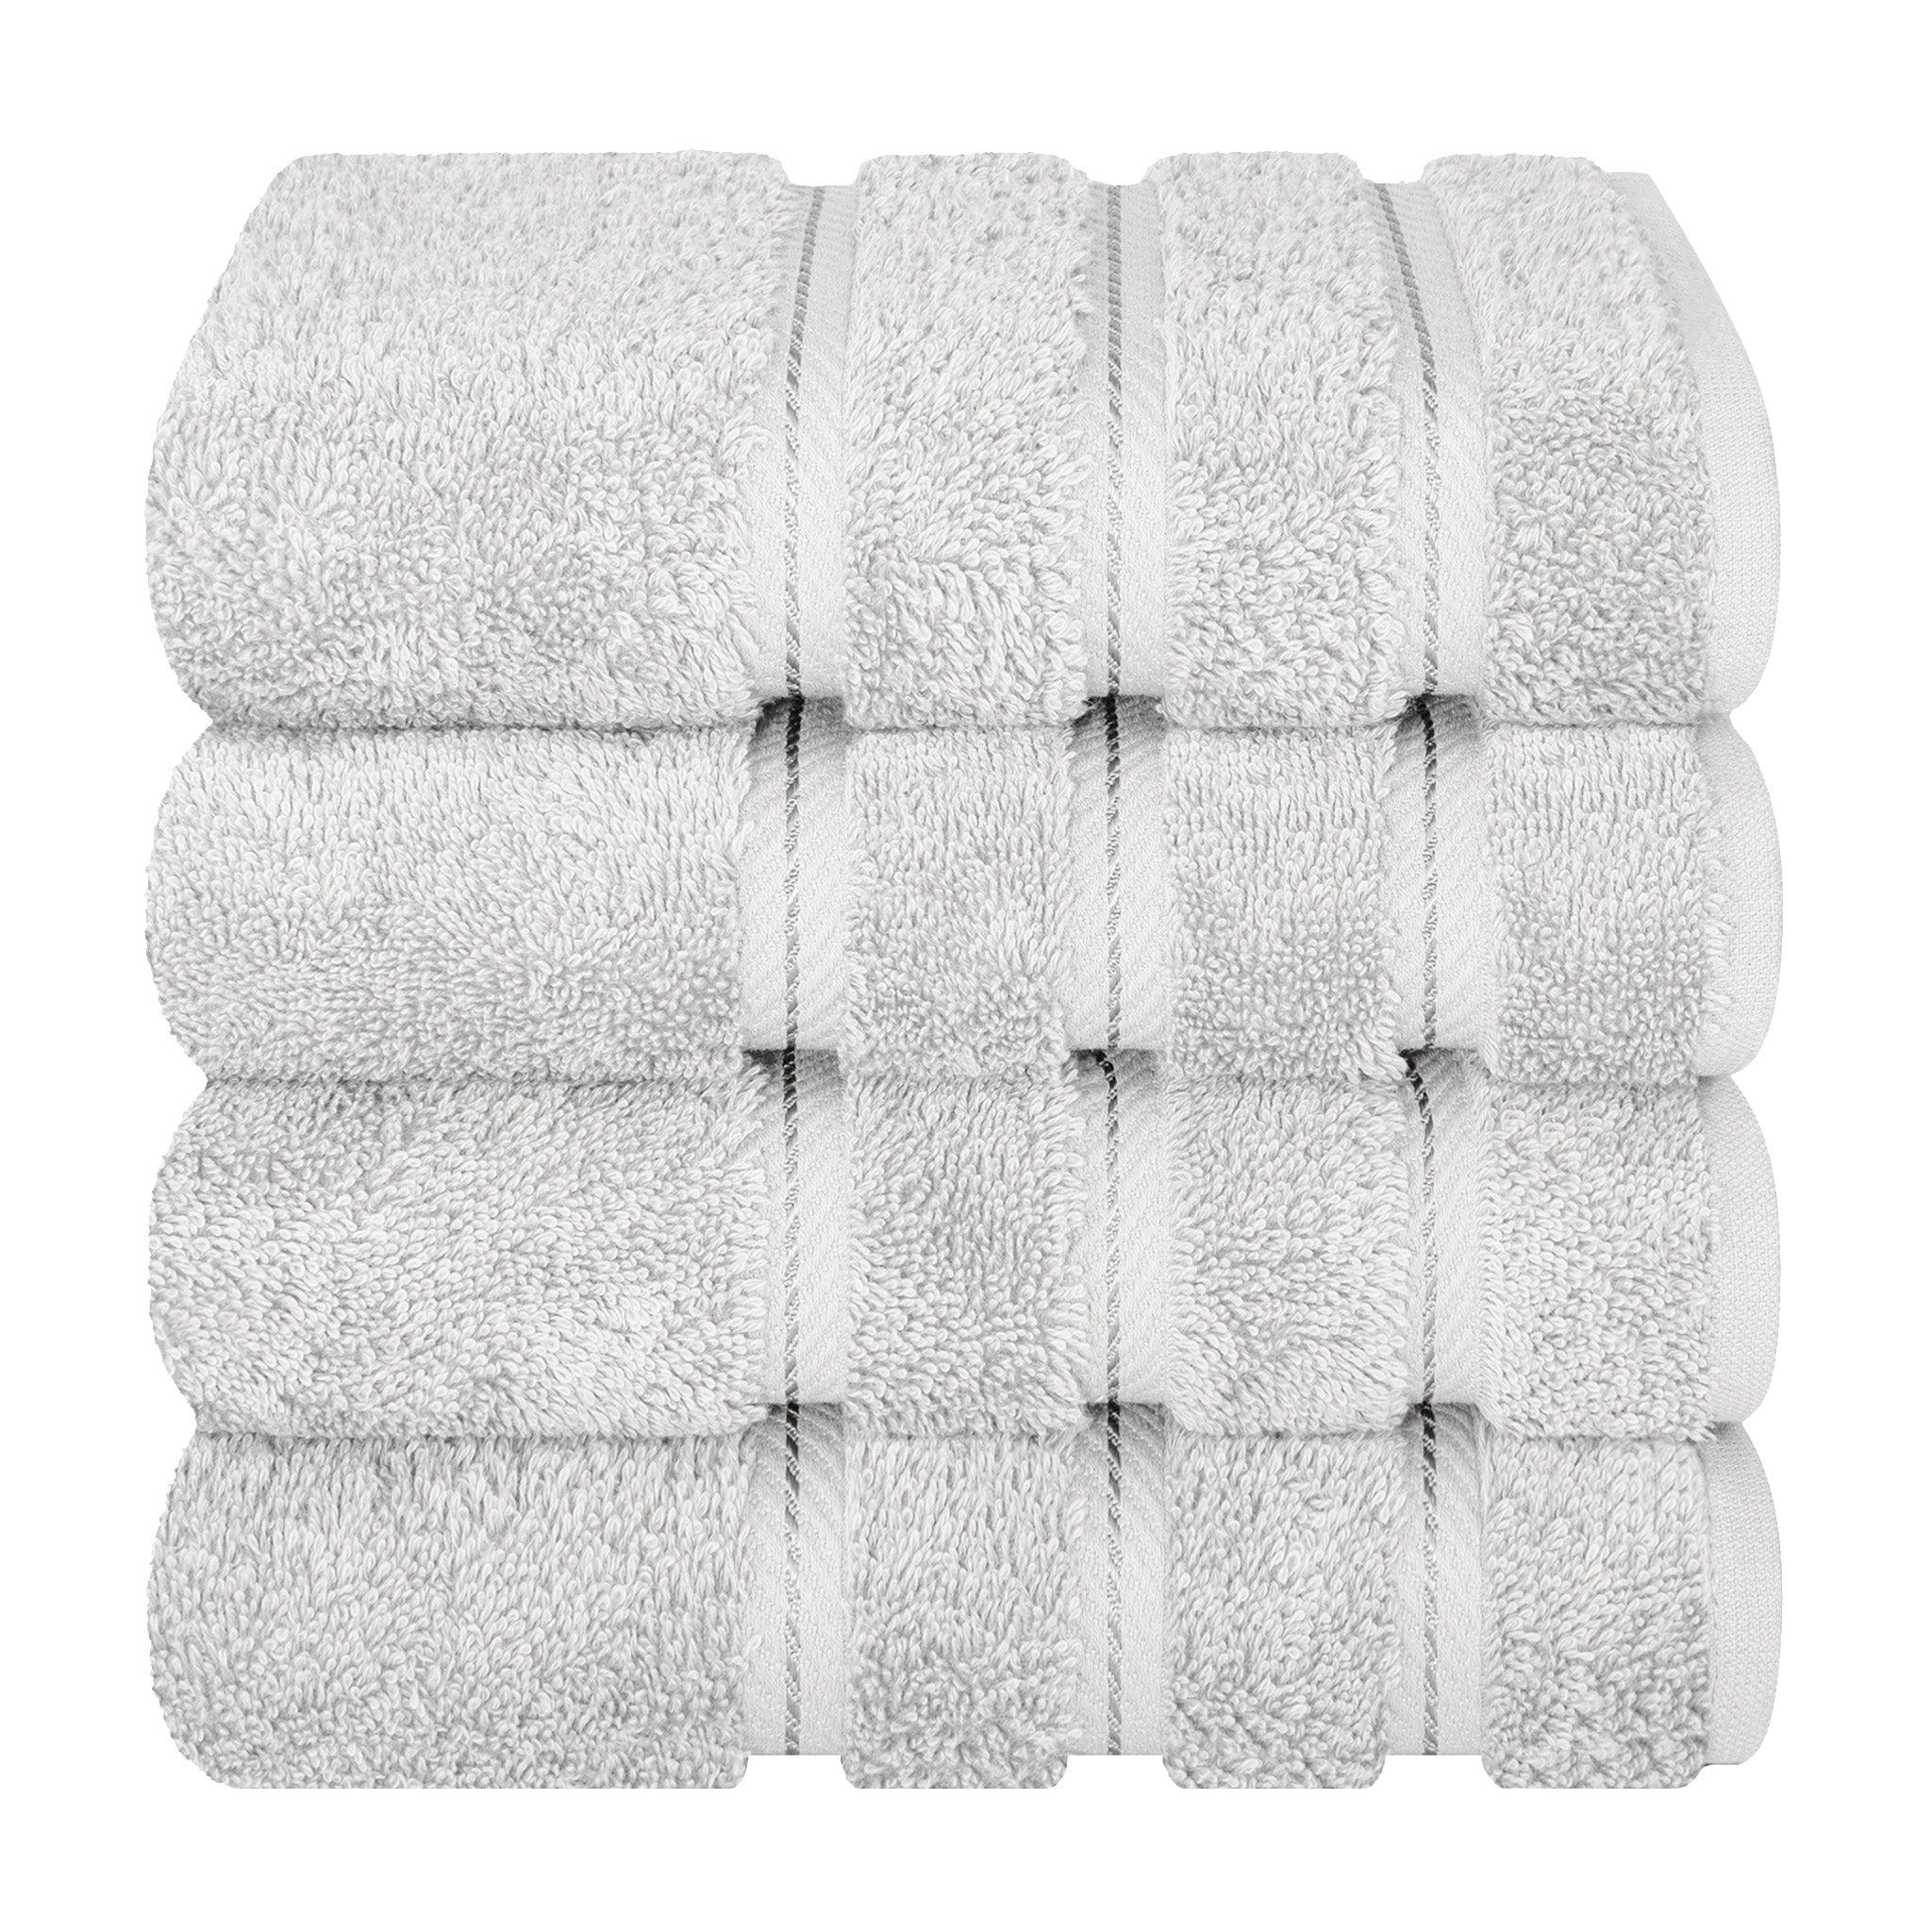 American Soft Linen 100% Turkish Cotton 4 Pack Hand Towel Set silver-gray-7